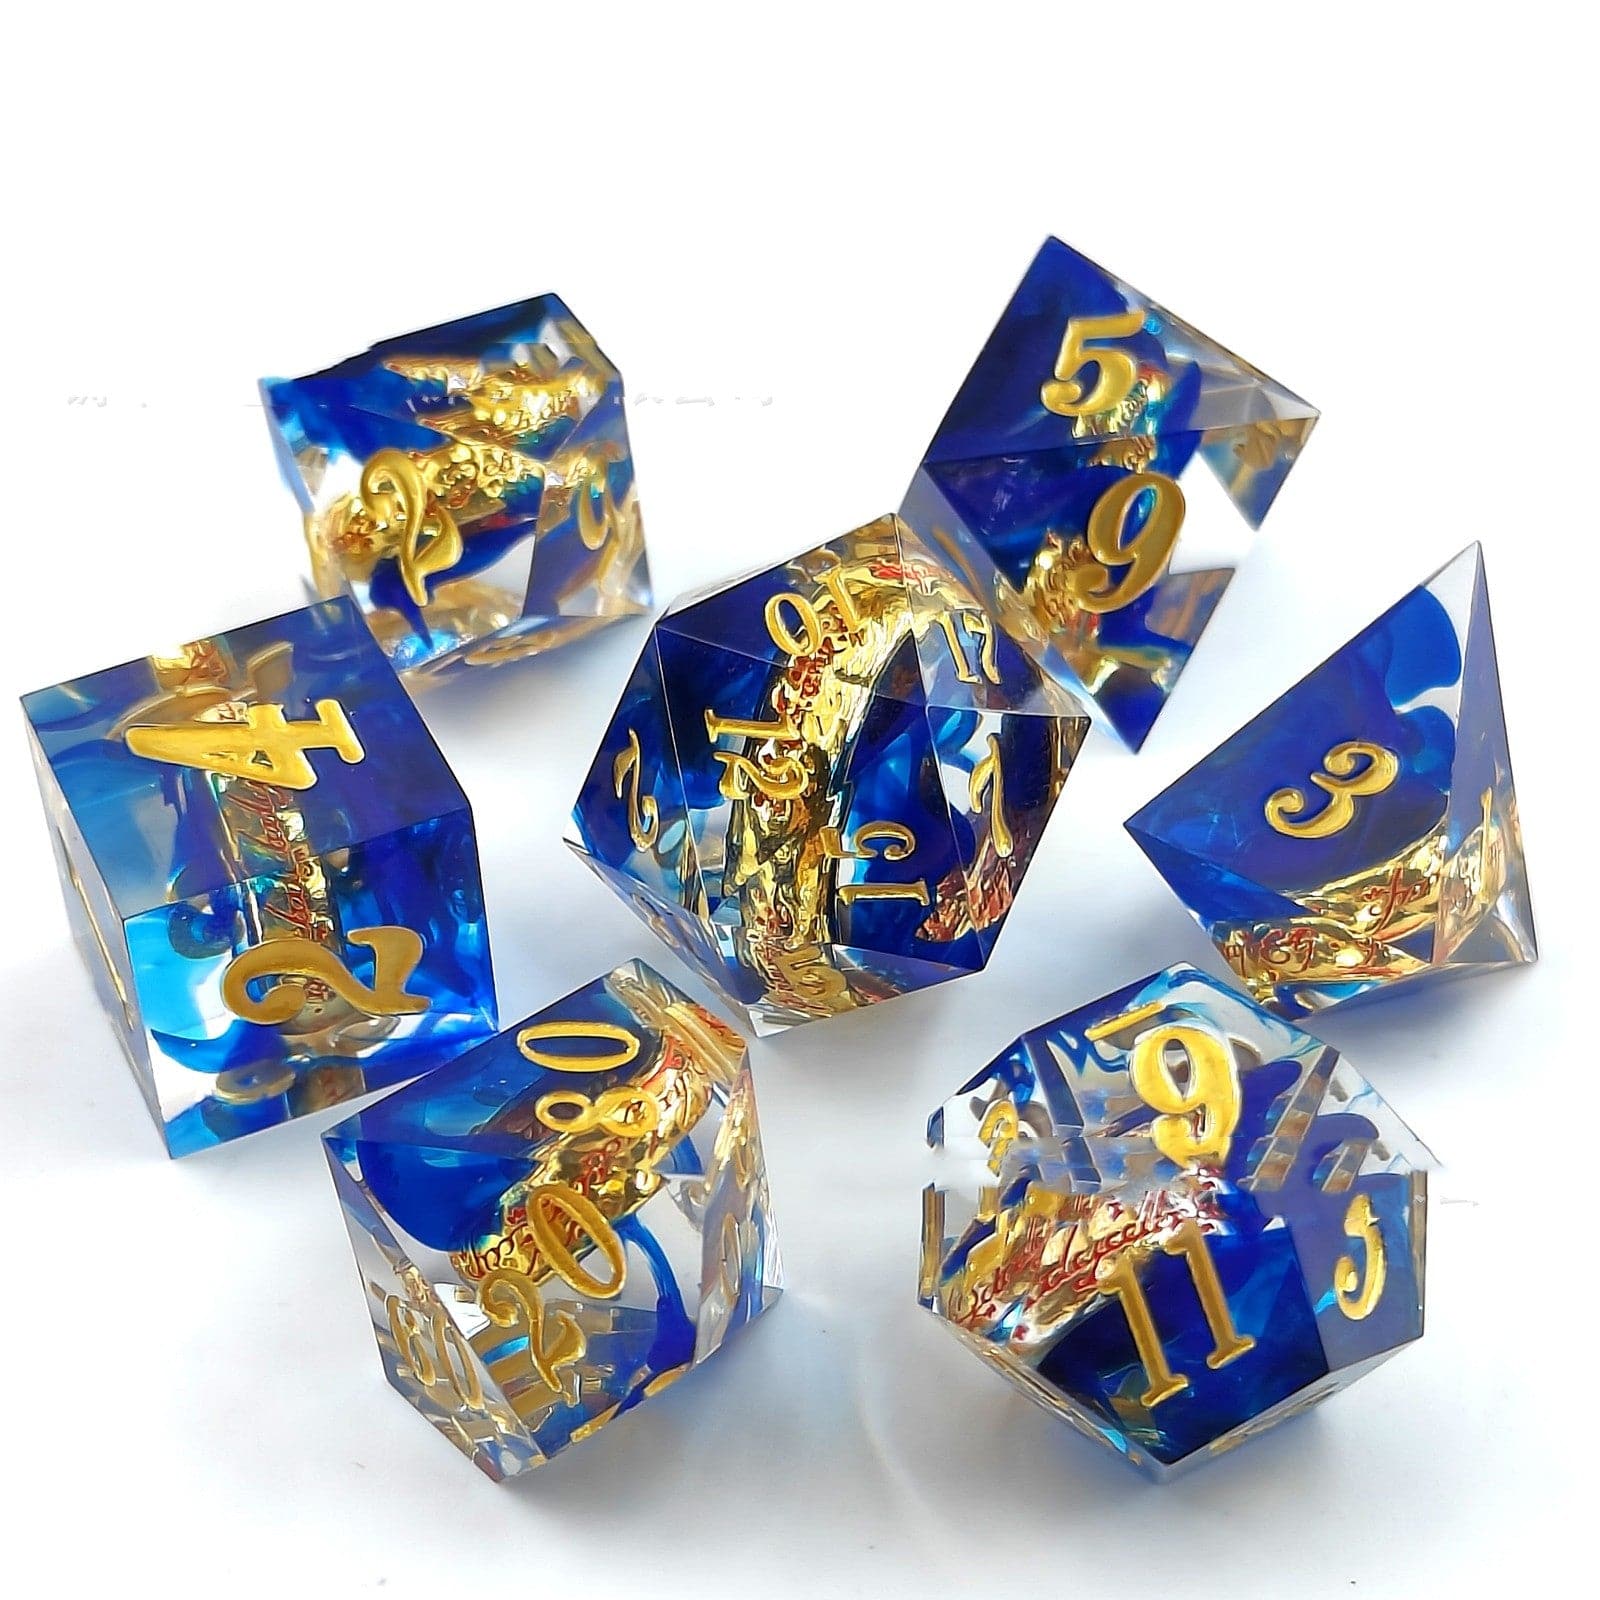 Resin Pointed Multi-sided Digital Dice-DungeonDice1